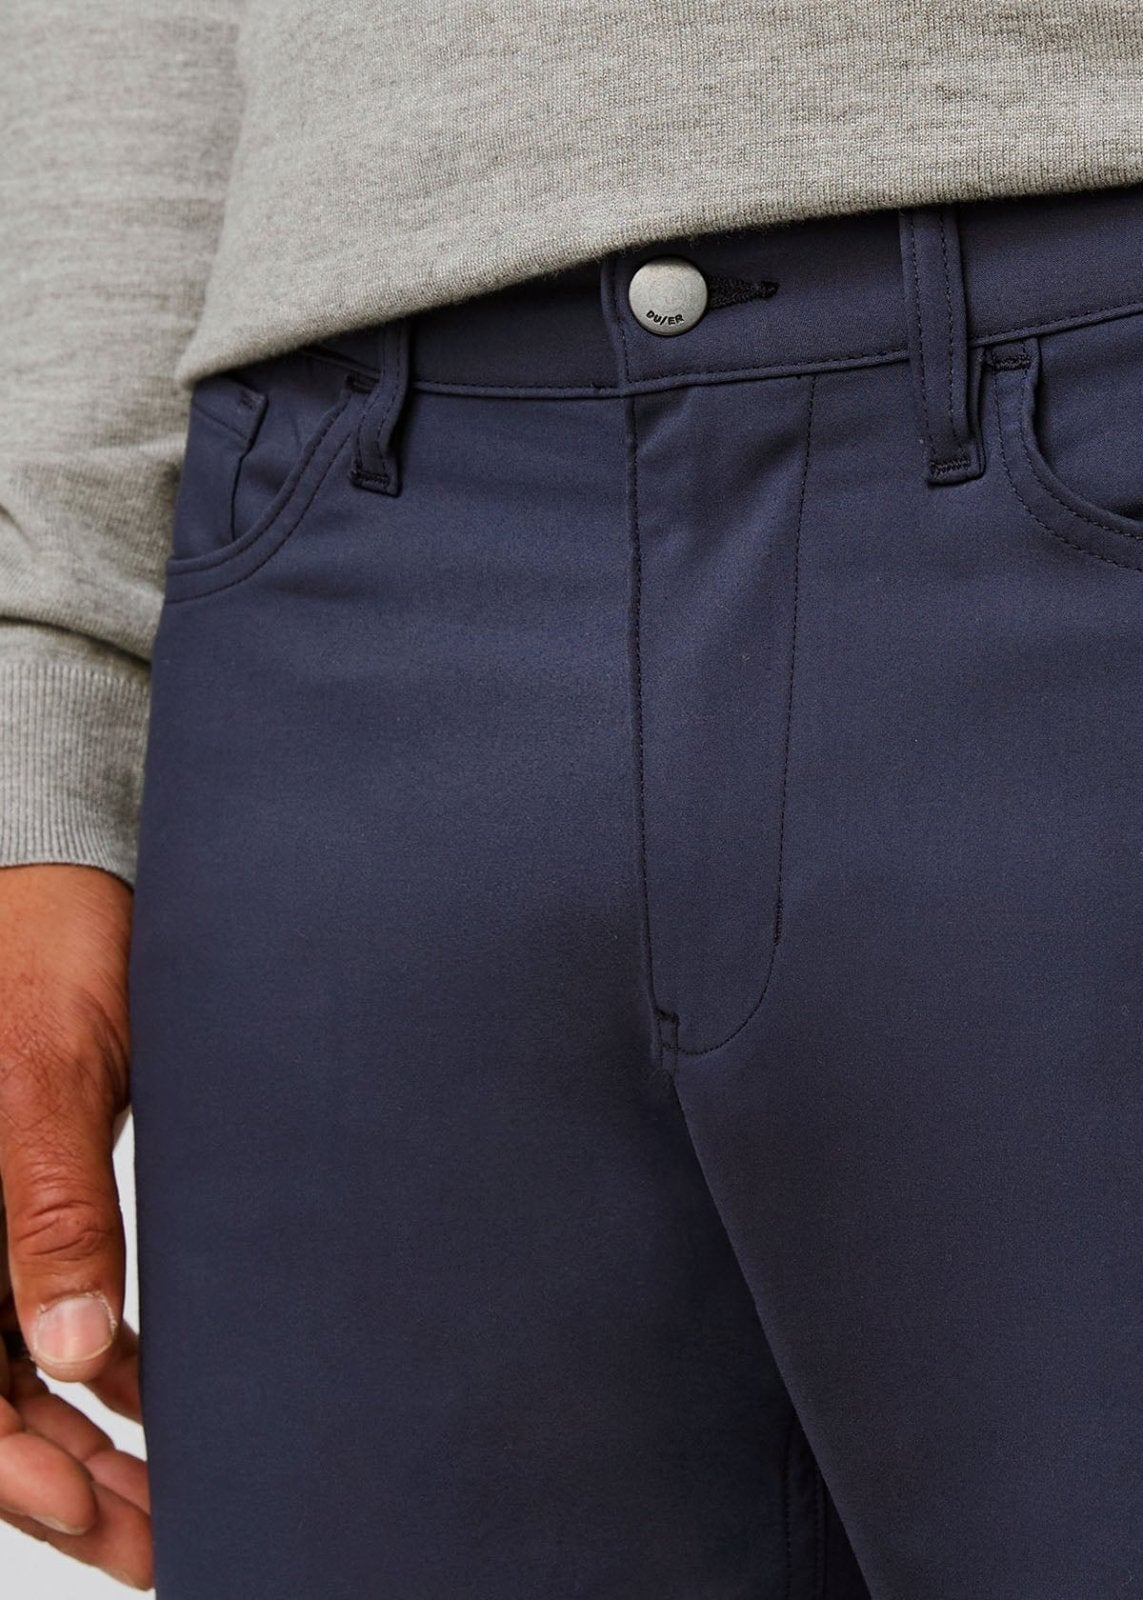 mens navy relaxed fit stretch pant front waistband detail